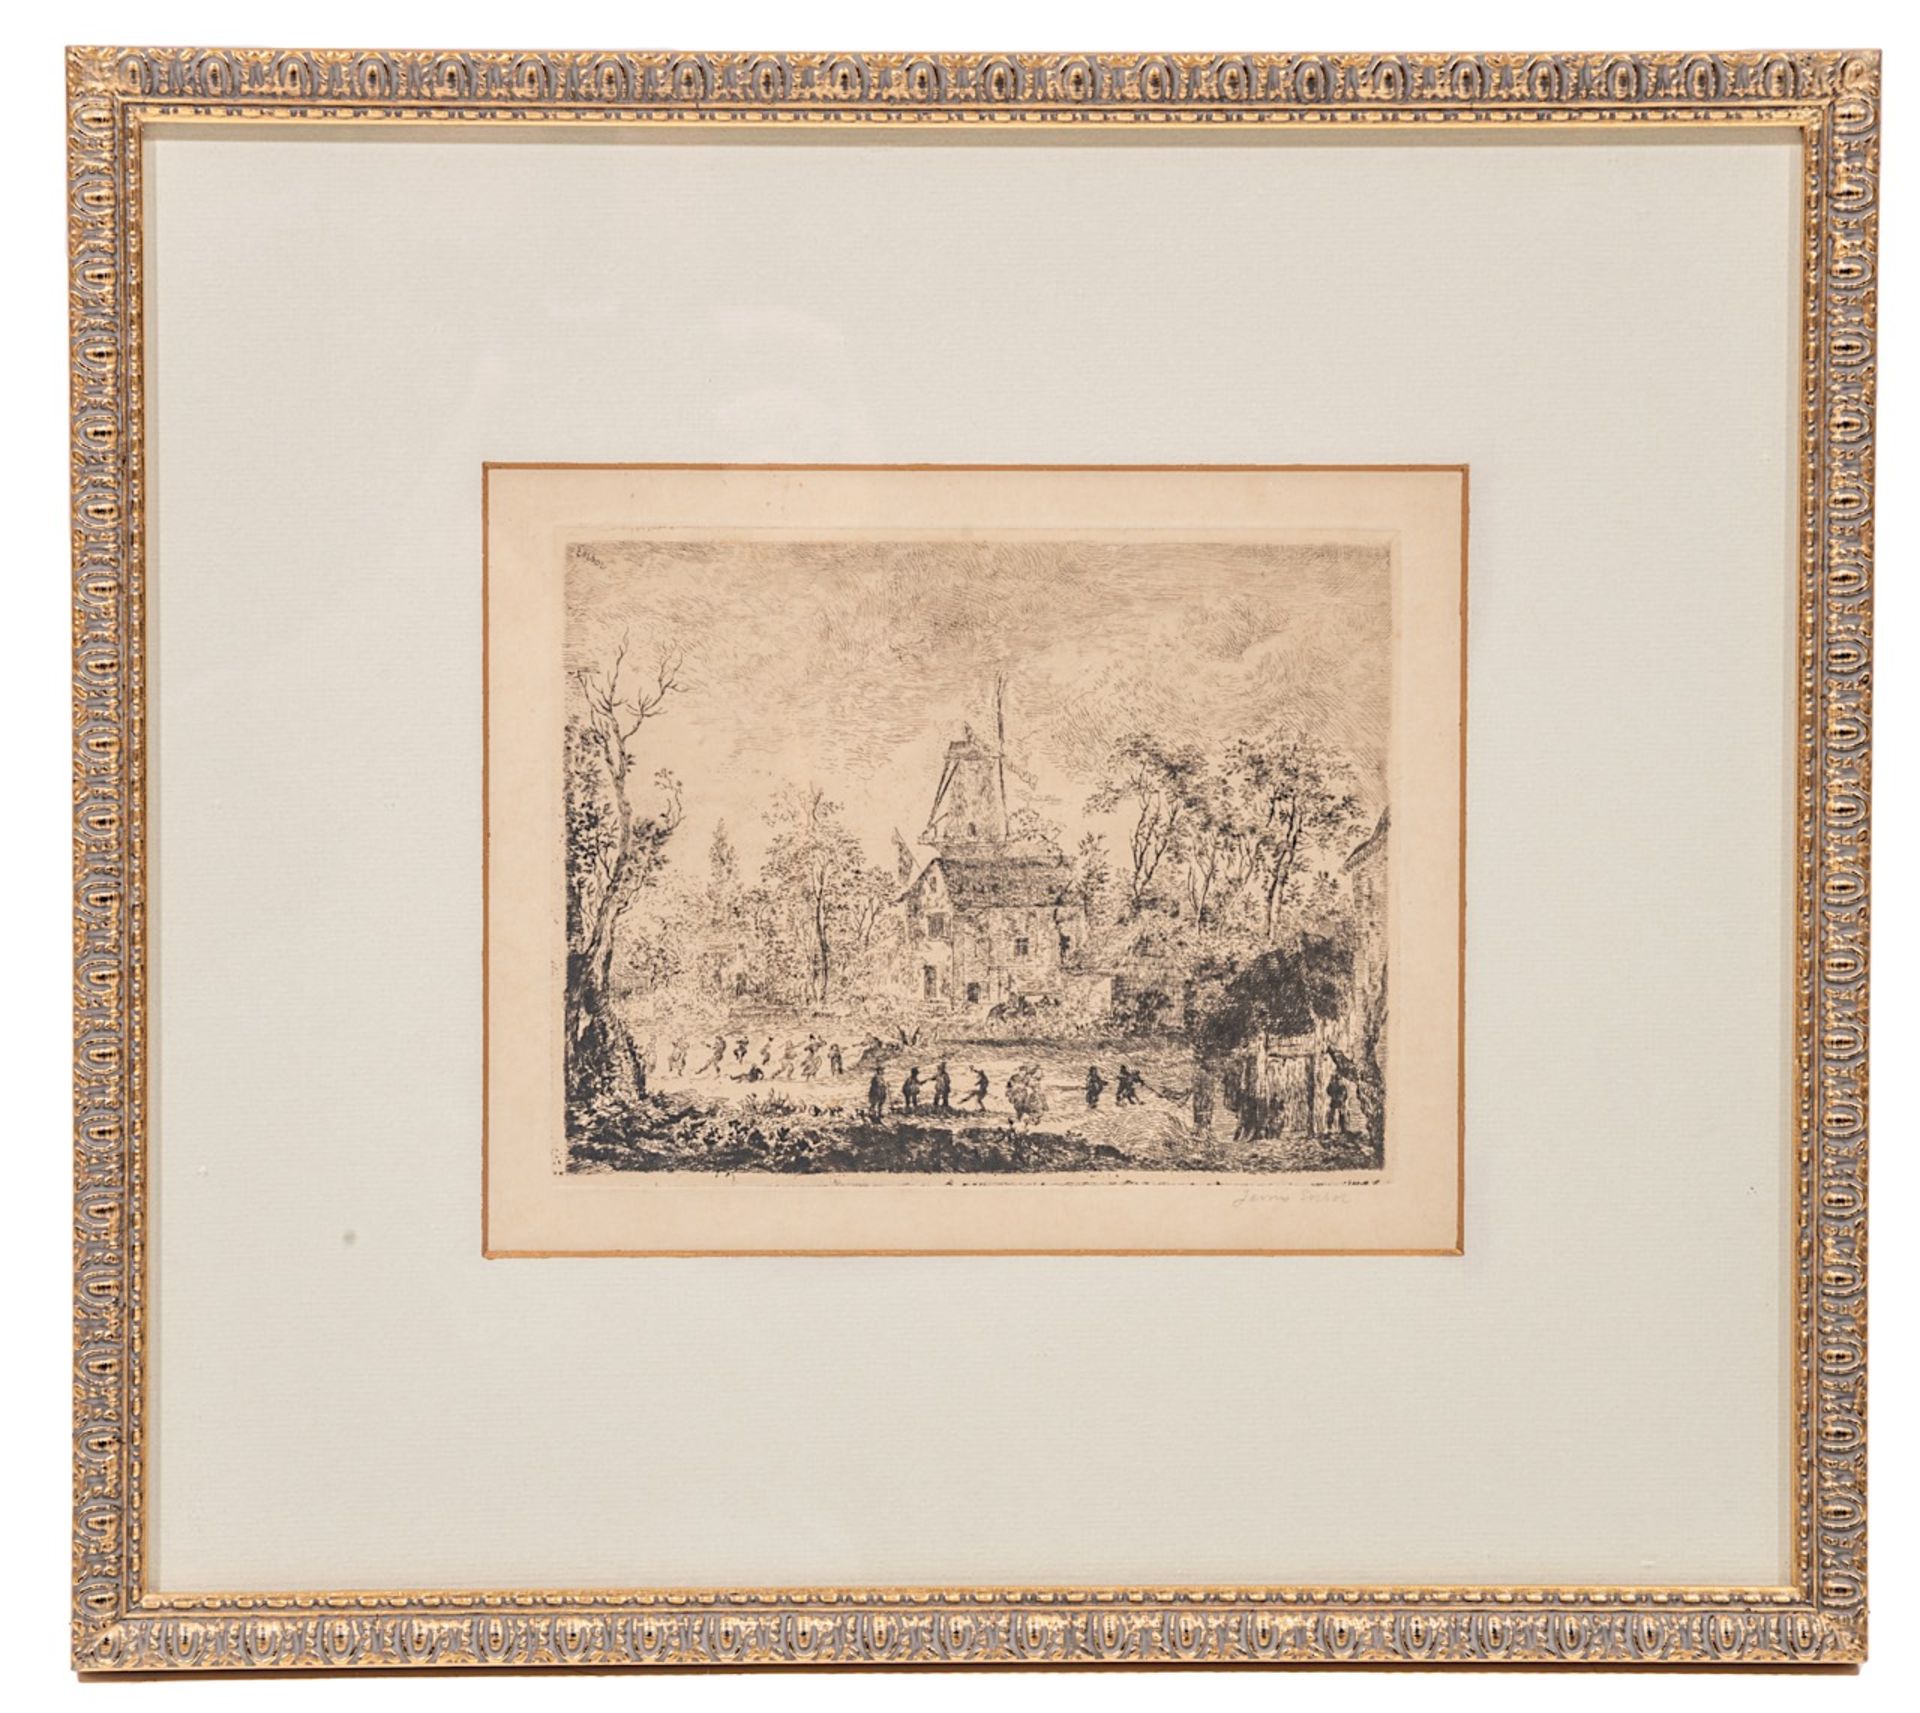 James Ensor (1860-1949), 'Village Fair at the Windmill' ('Kermesse au Moulin'), (1889), etching on s - Image 2 of 6